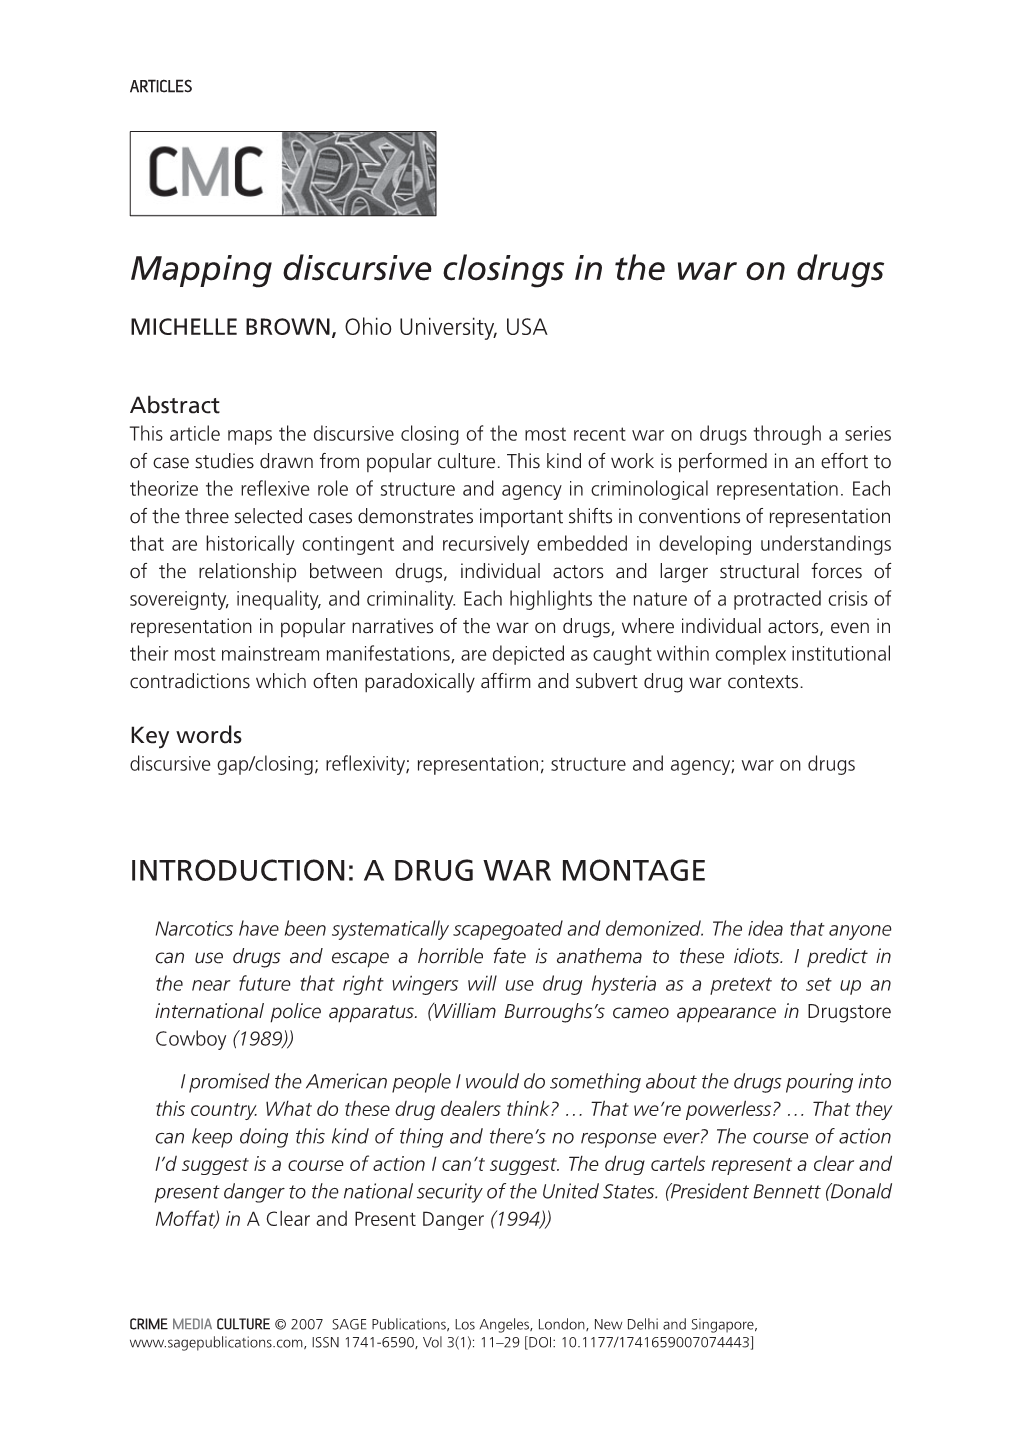 Mapping Discursive Closings in the War on Drugs